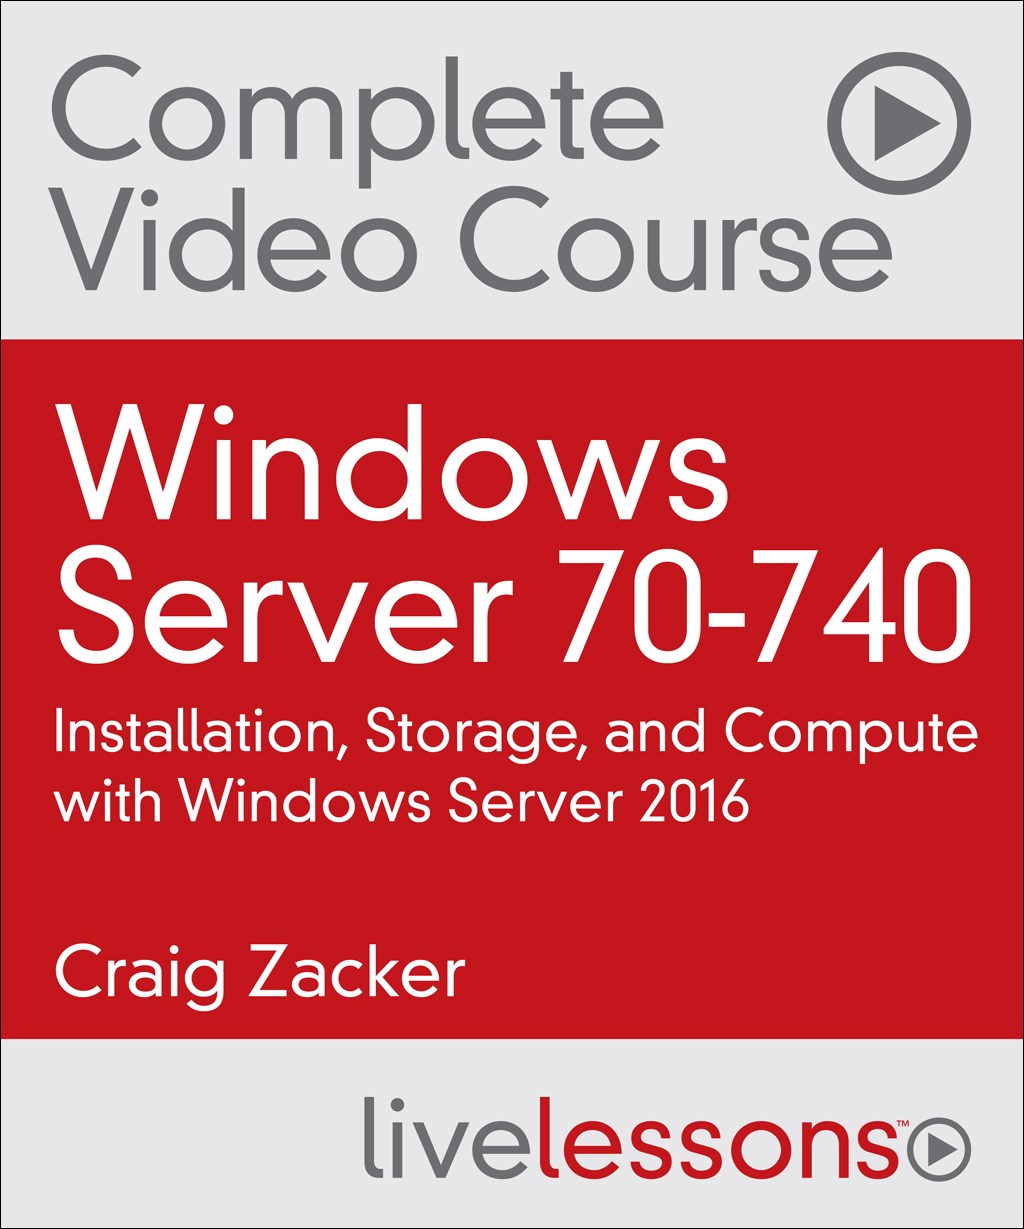 Windows Server 70-740: Installation, Storage, and Compute with Windows Server 2016 Complete Video Course and Practice Test